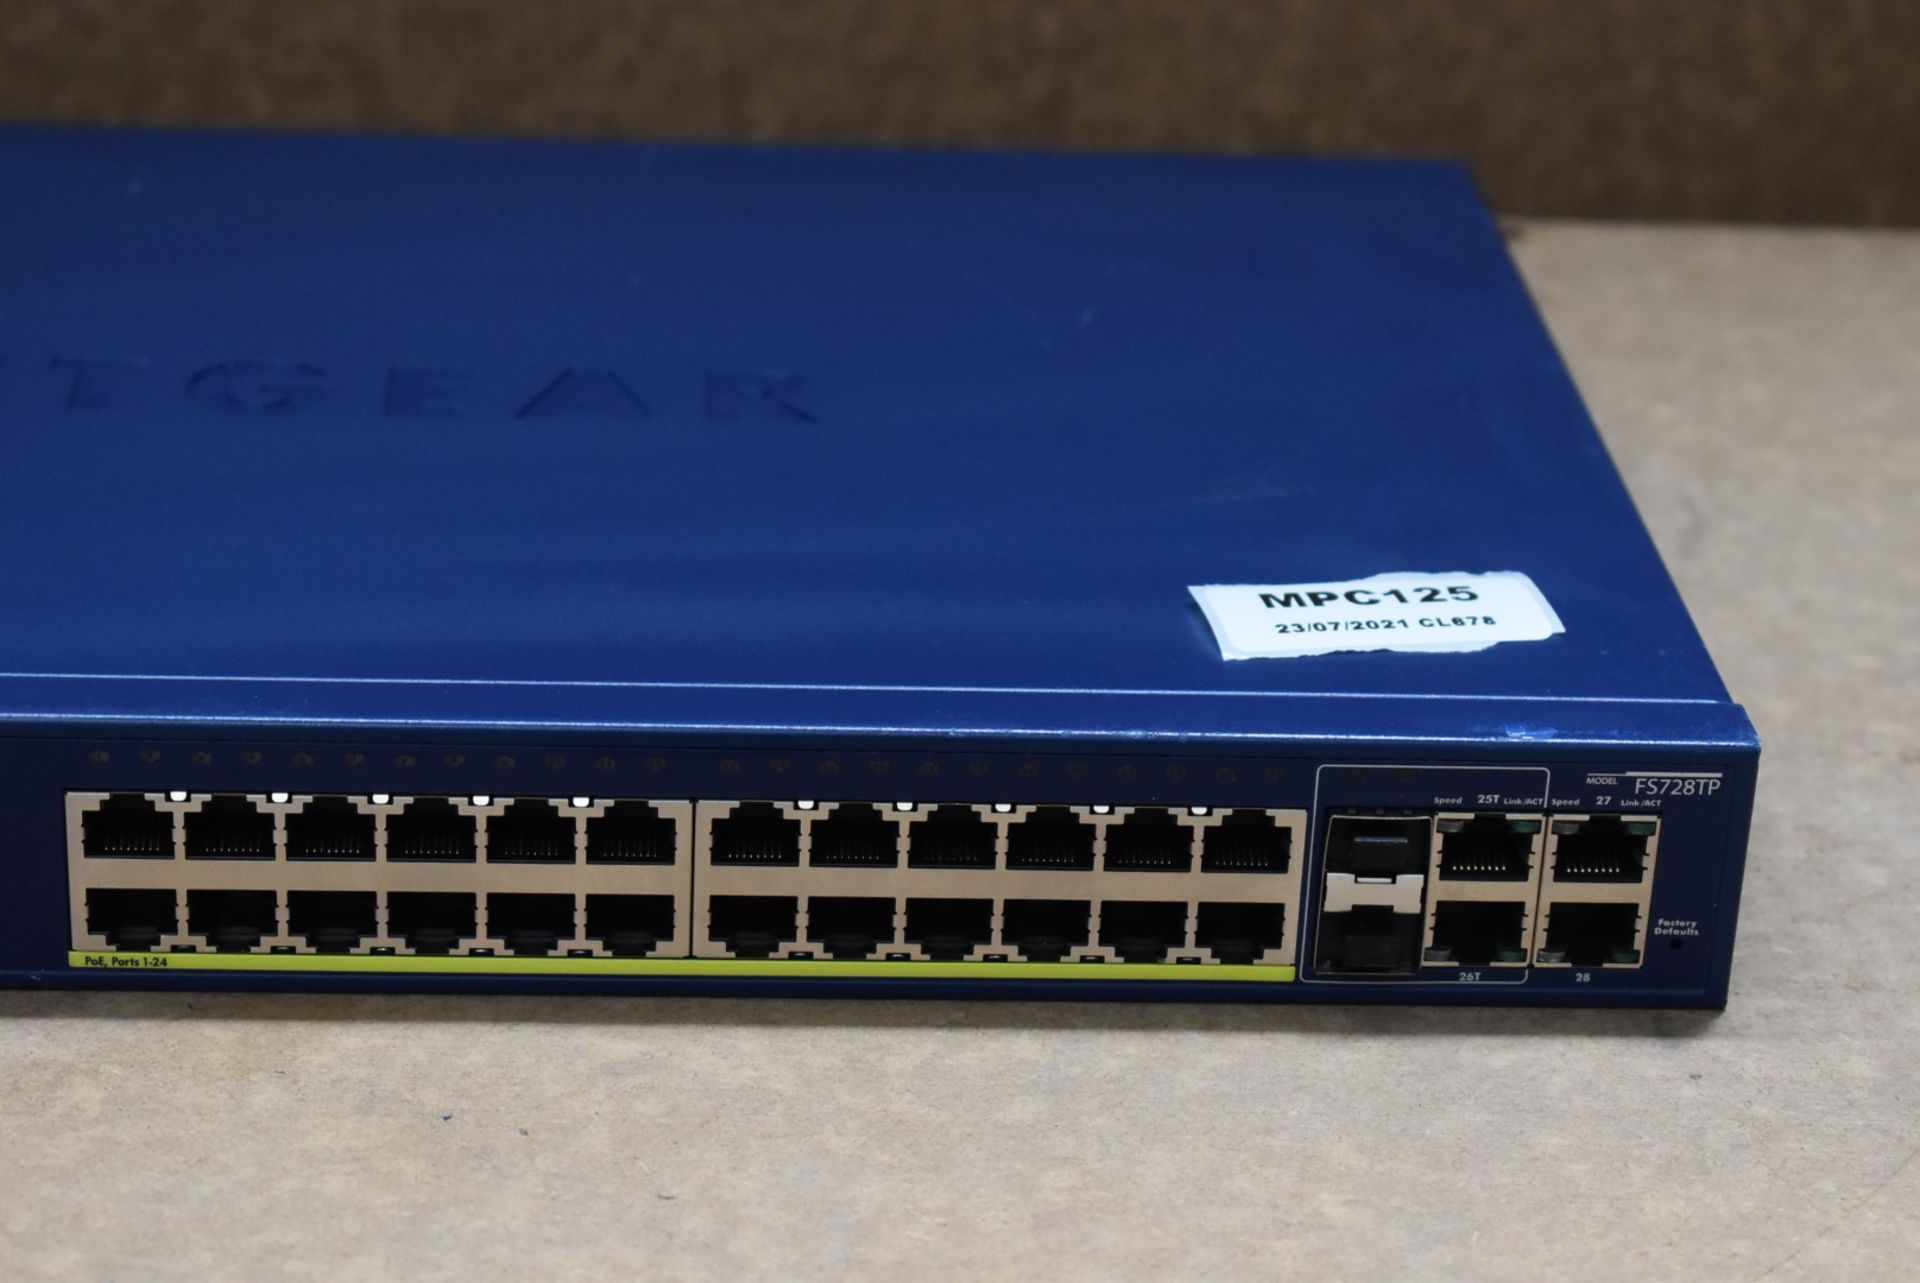 1 x Netgear FS728TP V2H1 24-Port 10/100 Smart Managed Switch with POE - RRP £453 - Includes Power - Image 2 of 6